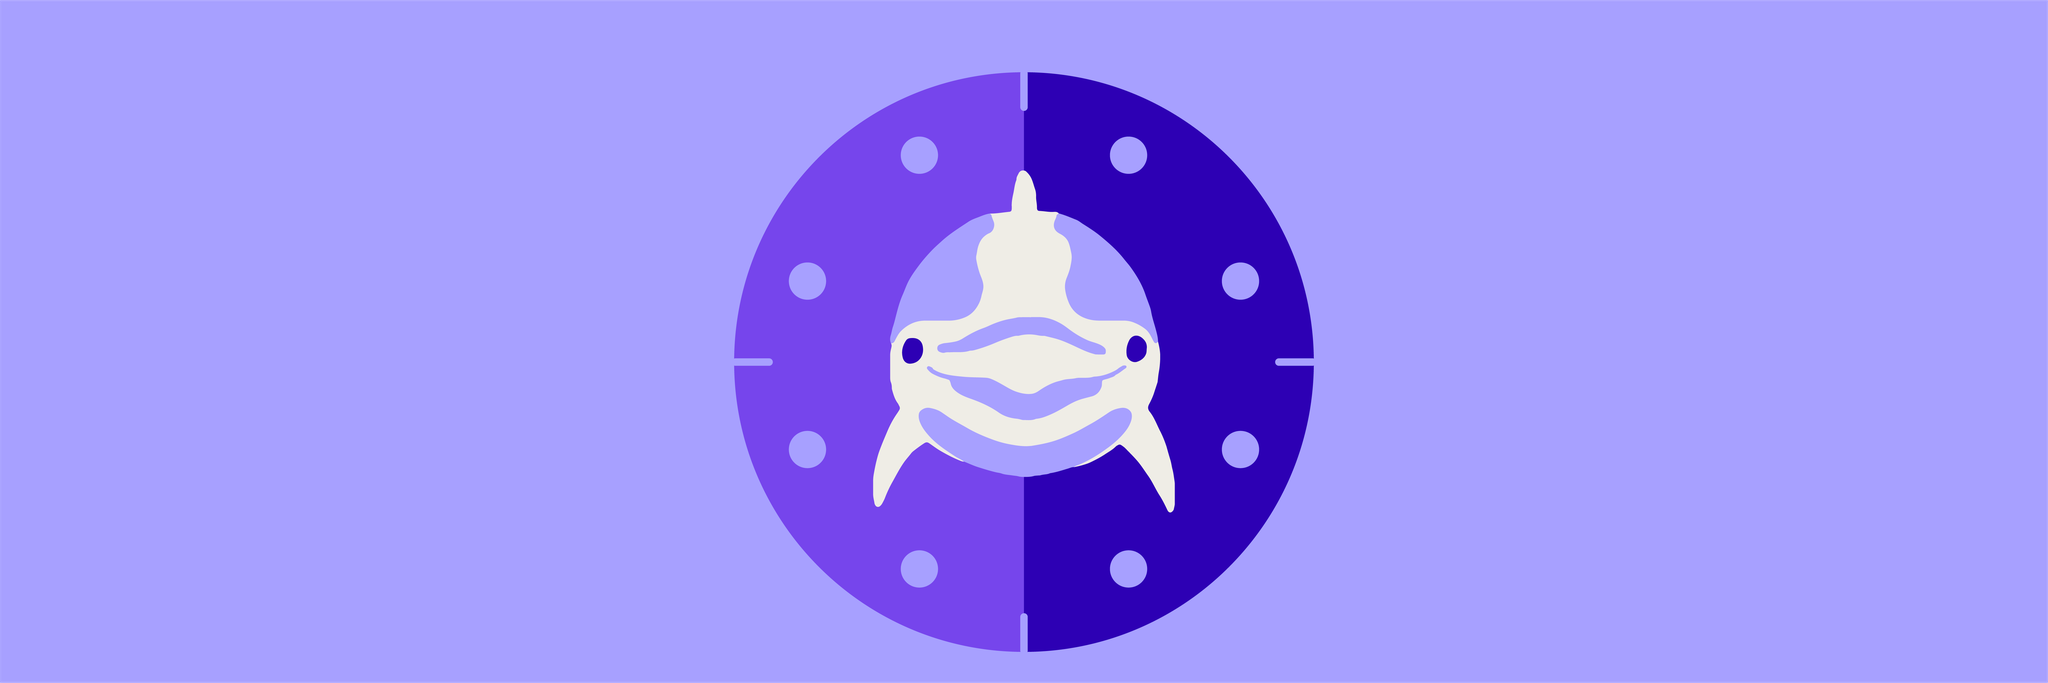 The head of a dolphin in the center of a clock represents the dolphin chronotype.